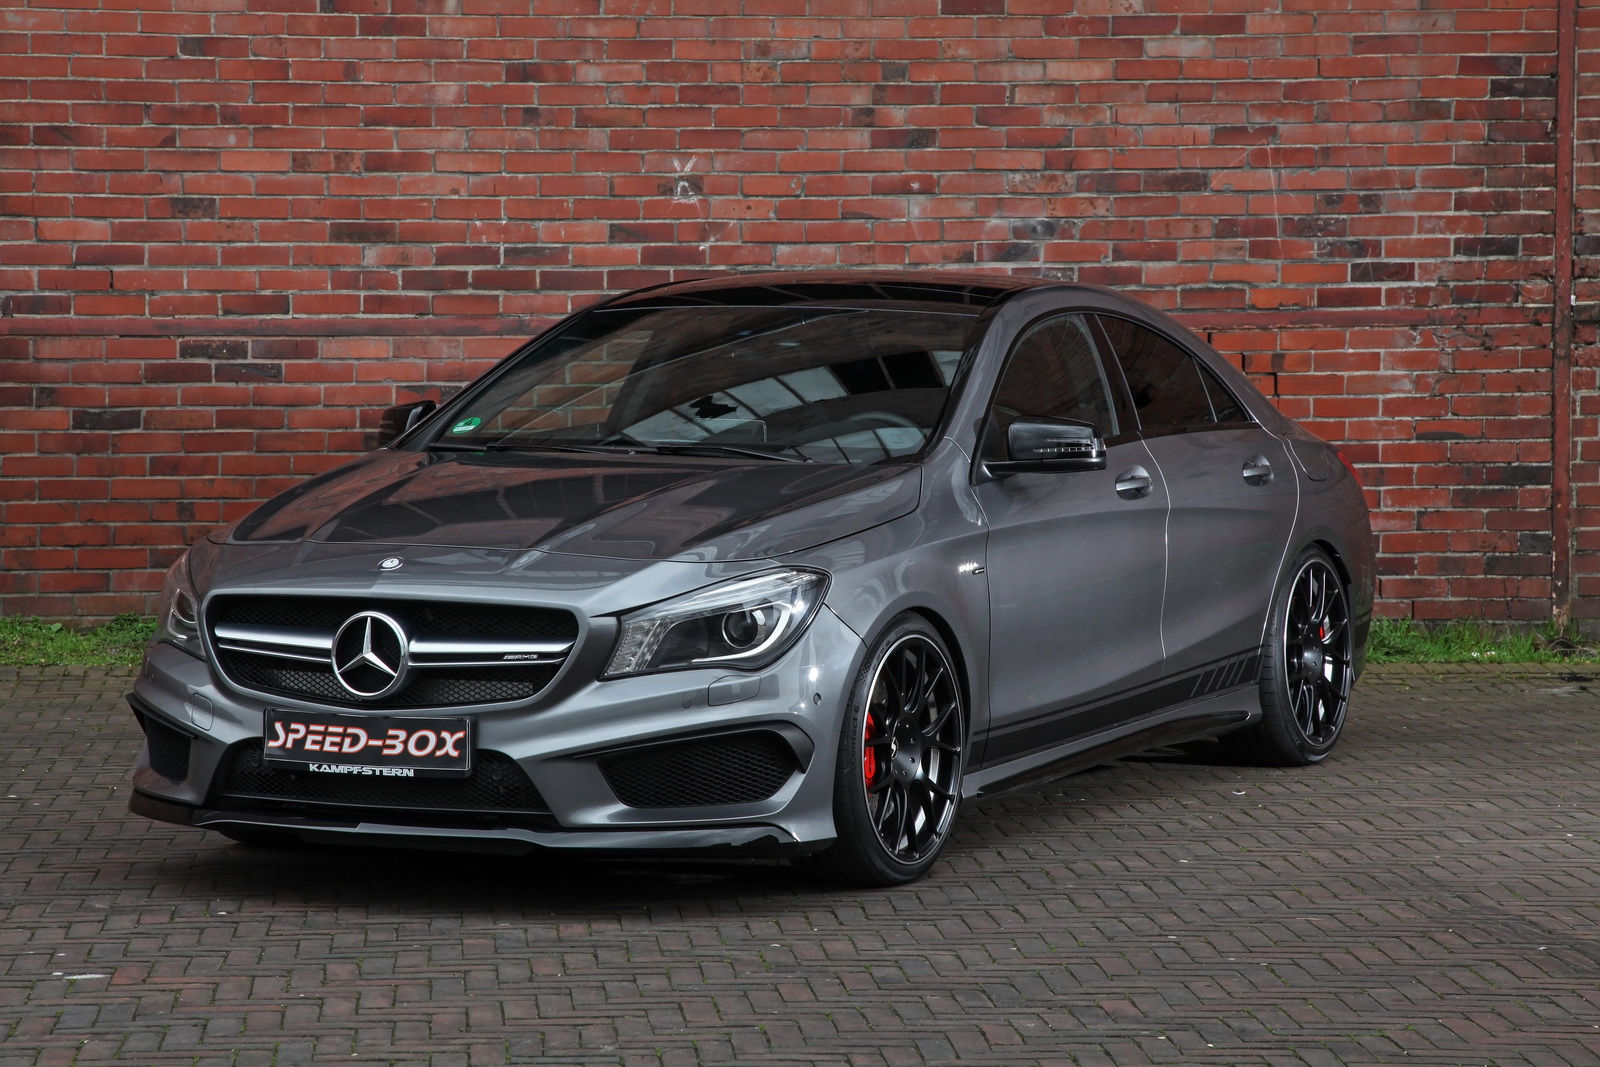 Facelifted MercedesAMG CLA 45 Gets Horsepower Injection